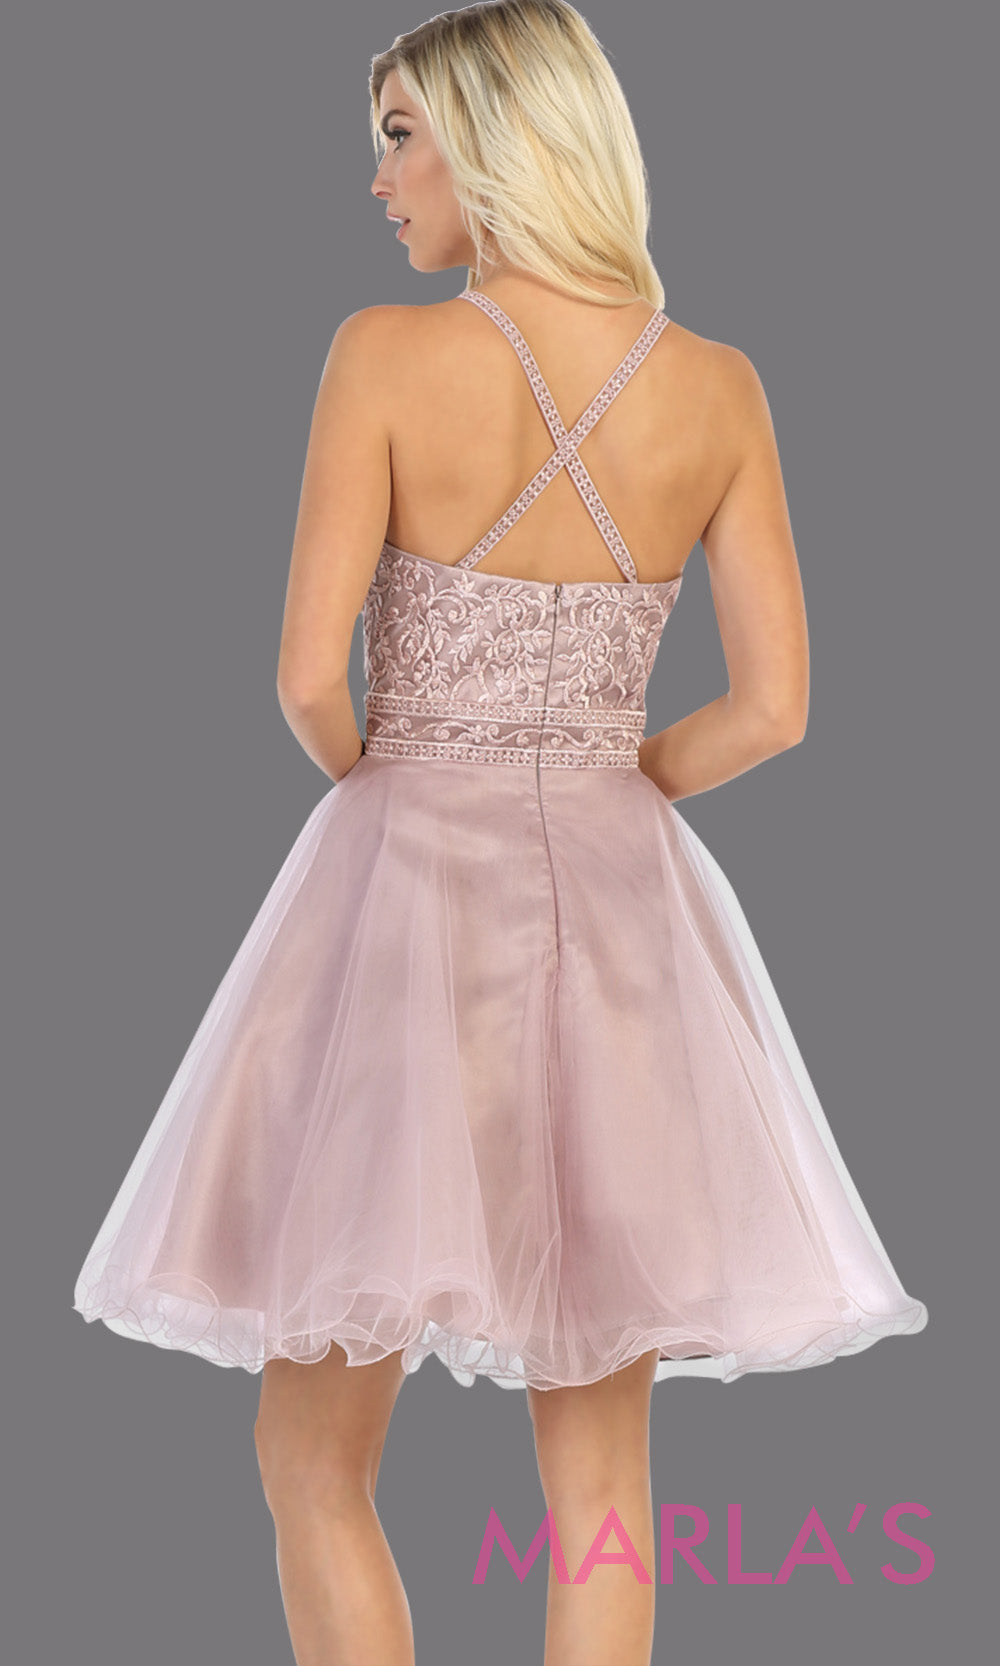 Back of Short high neck mauve grade 8 graduation dress with puffy skirt from mayqueen. This dusty rose cross back dress is perfect for plus size grad, homecoming, Bat Mitzvah, quinceanera damas, middle school graduation, junior bridesmaidsgrade 8 grad dresses, graduation dresses